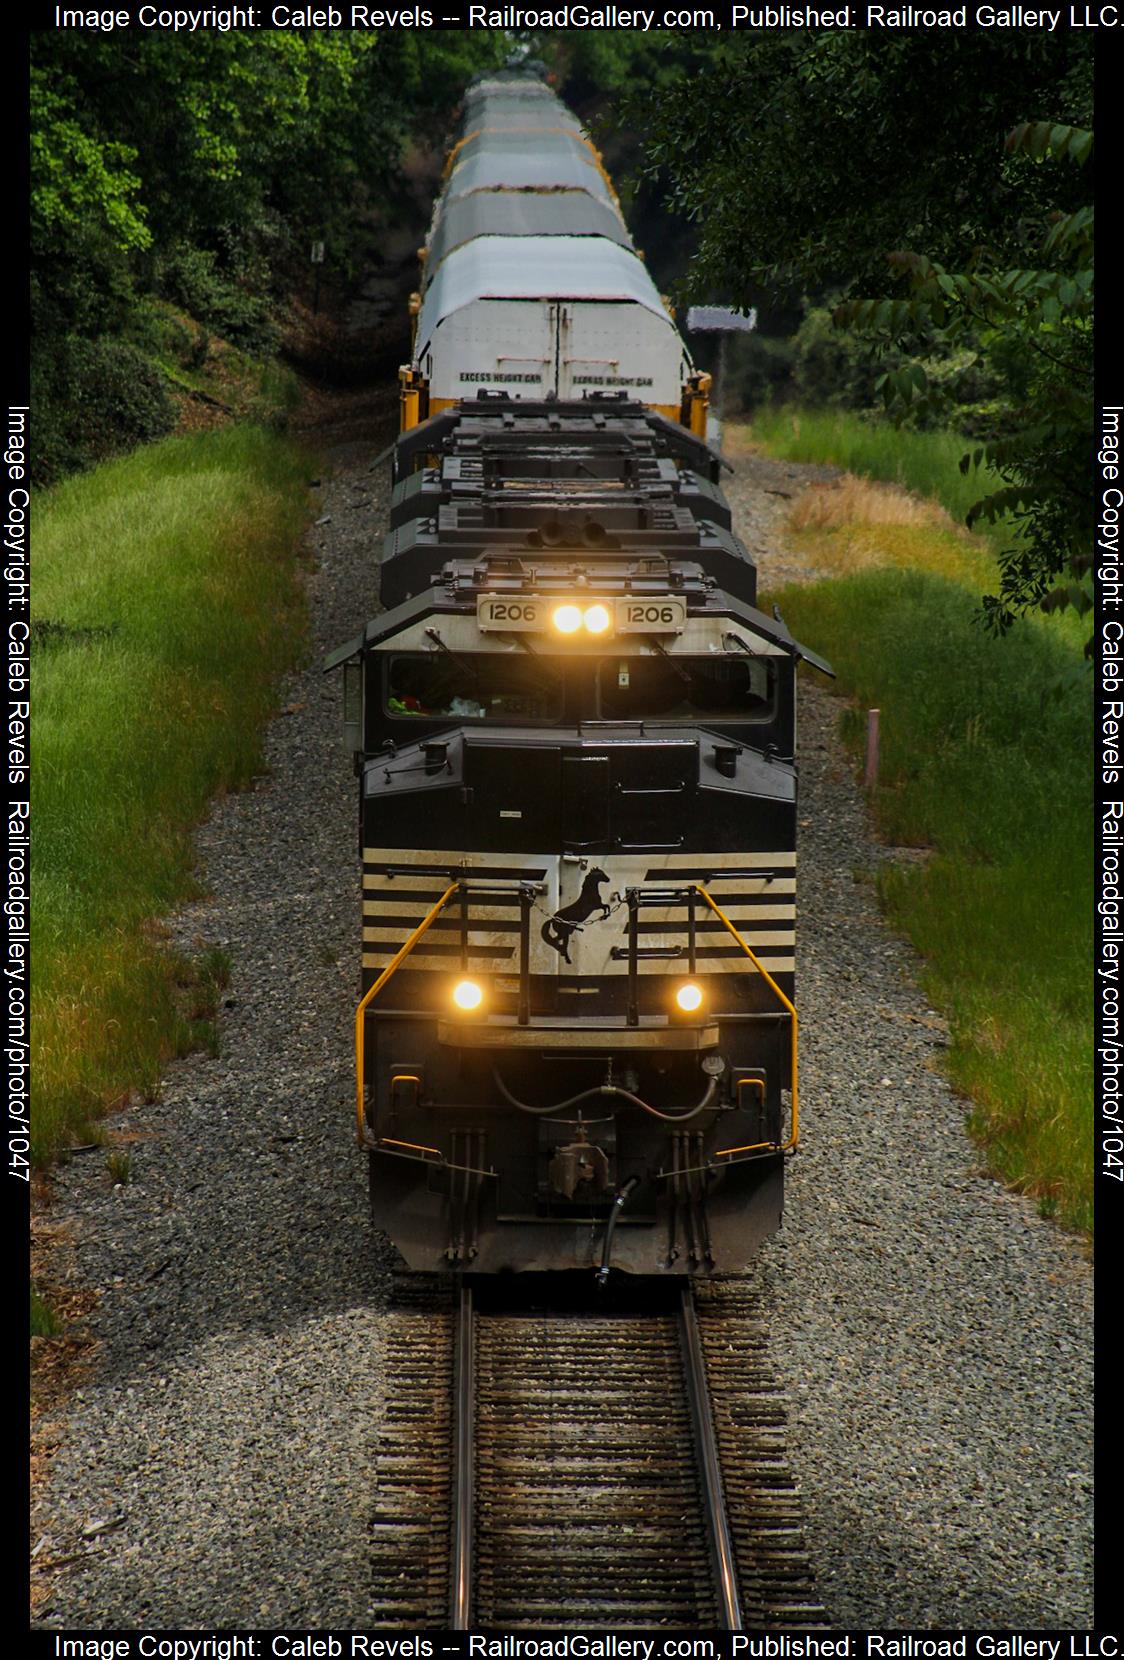 NS 1206 is a class EMD SD70ACe and  is pictured in Spartanburg, South Carolina, USA.  This was taken along the Norfolk Southern W Line  on the Norfolk Southern. Photo Copyright: Caleb Revels uploaded to Railroad Gallery on 05/08/2023. This photograph of NS 1206 was taken on Saturday, May 06, 2023. All Rights Reserved. 